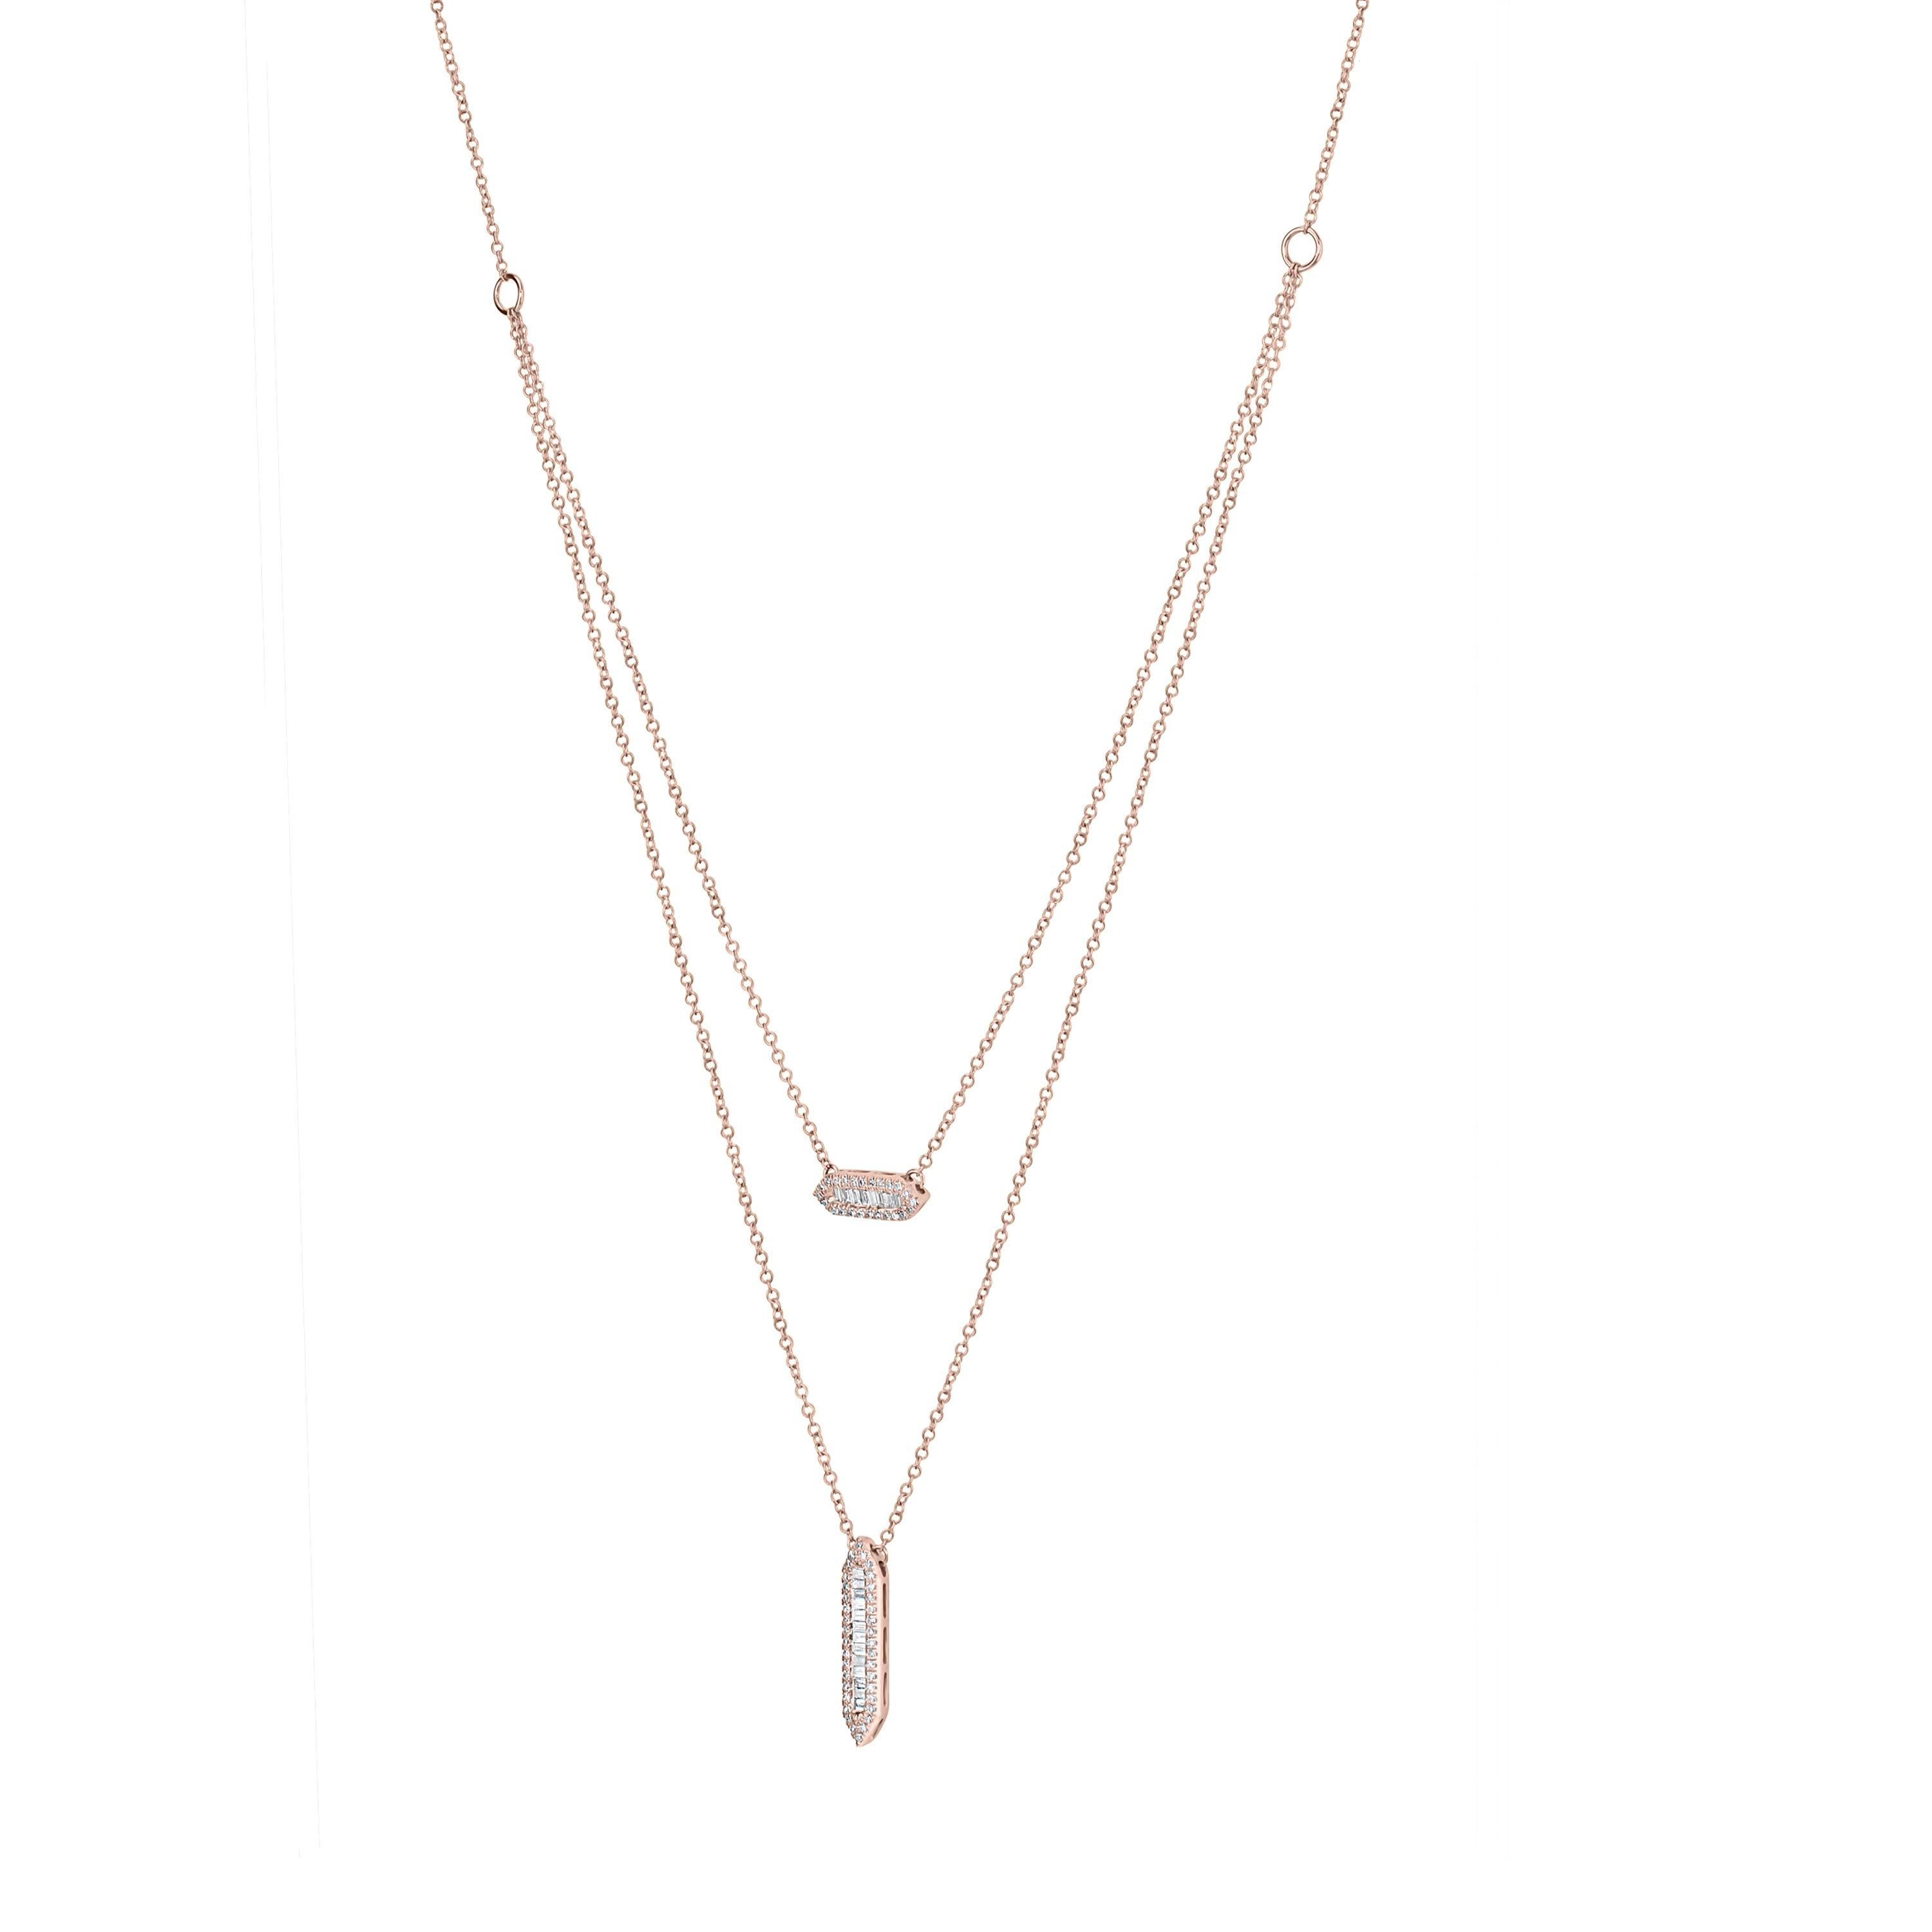 Layering never goes out of style with this Luxle stylish Round and Baguette Diamond Layered Pendant Necklace. Rendered in gleaming 14K rose gold this necklace sparkles with baguette and round diamonds totaling 0.45Cts embellished in two hexagonal